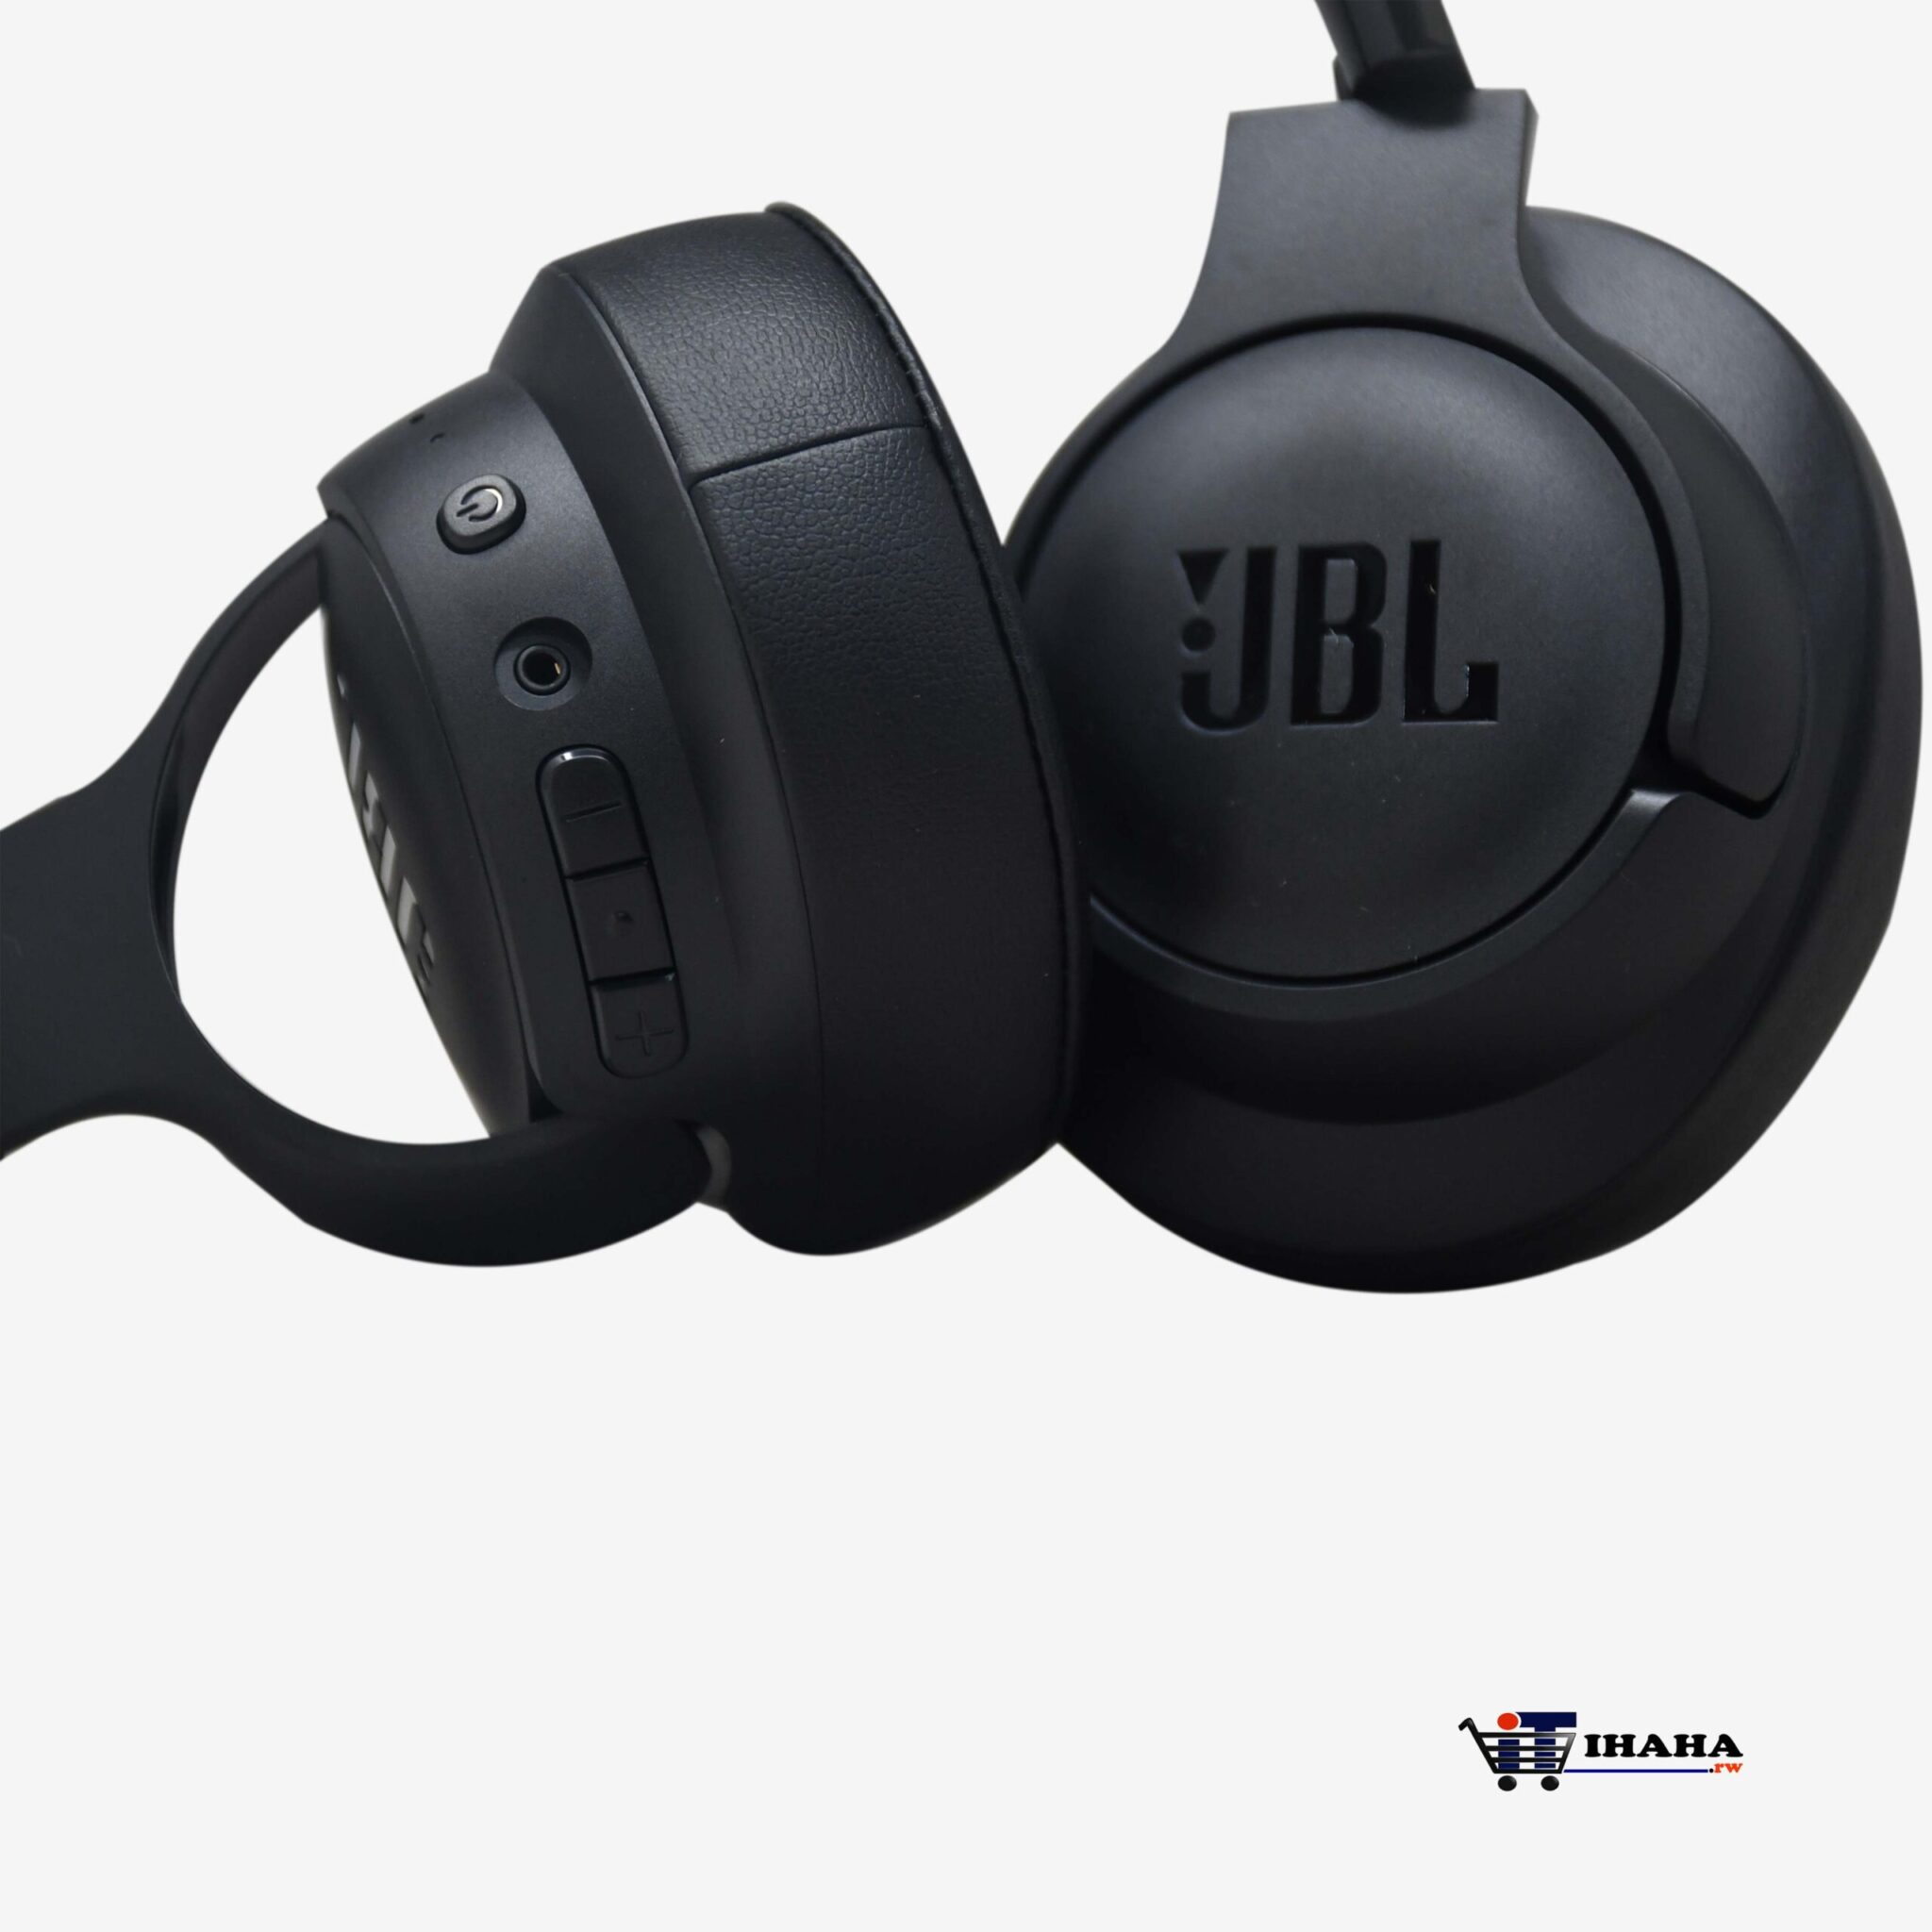 JBL Tune 710BT Wireless Over-Ear Headphones with Built-in Microphone